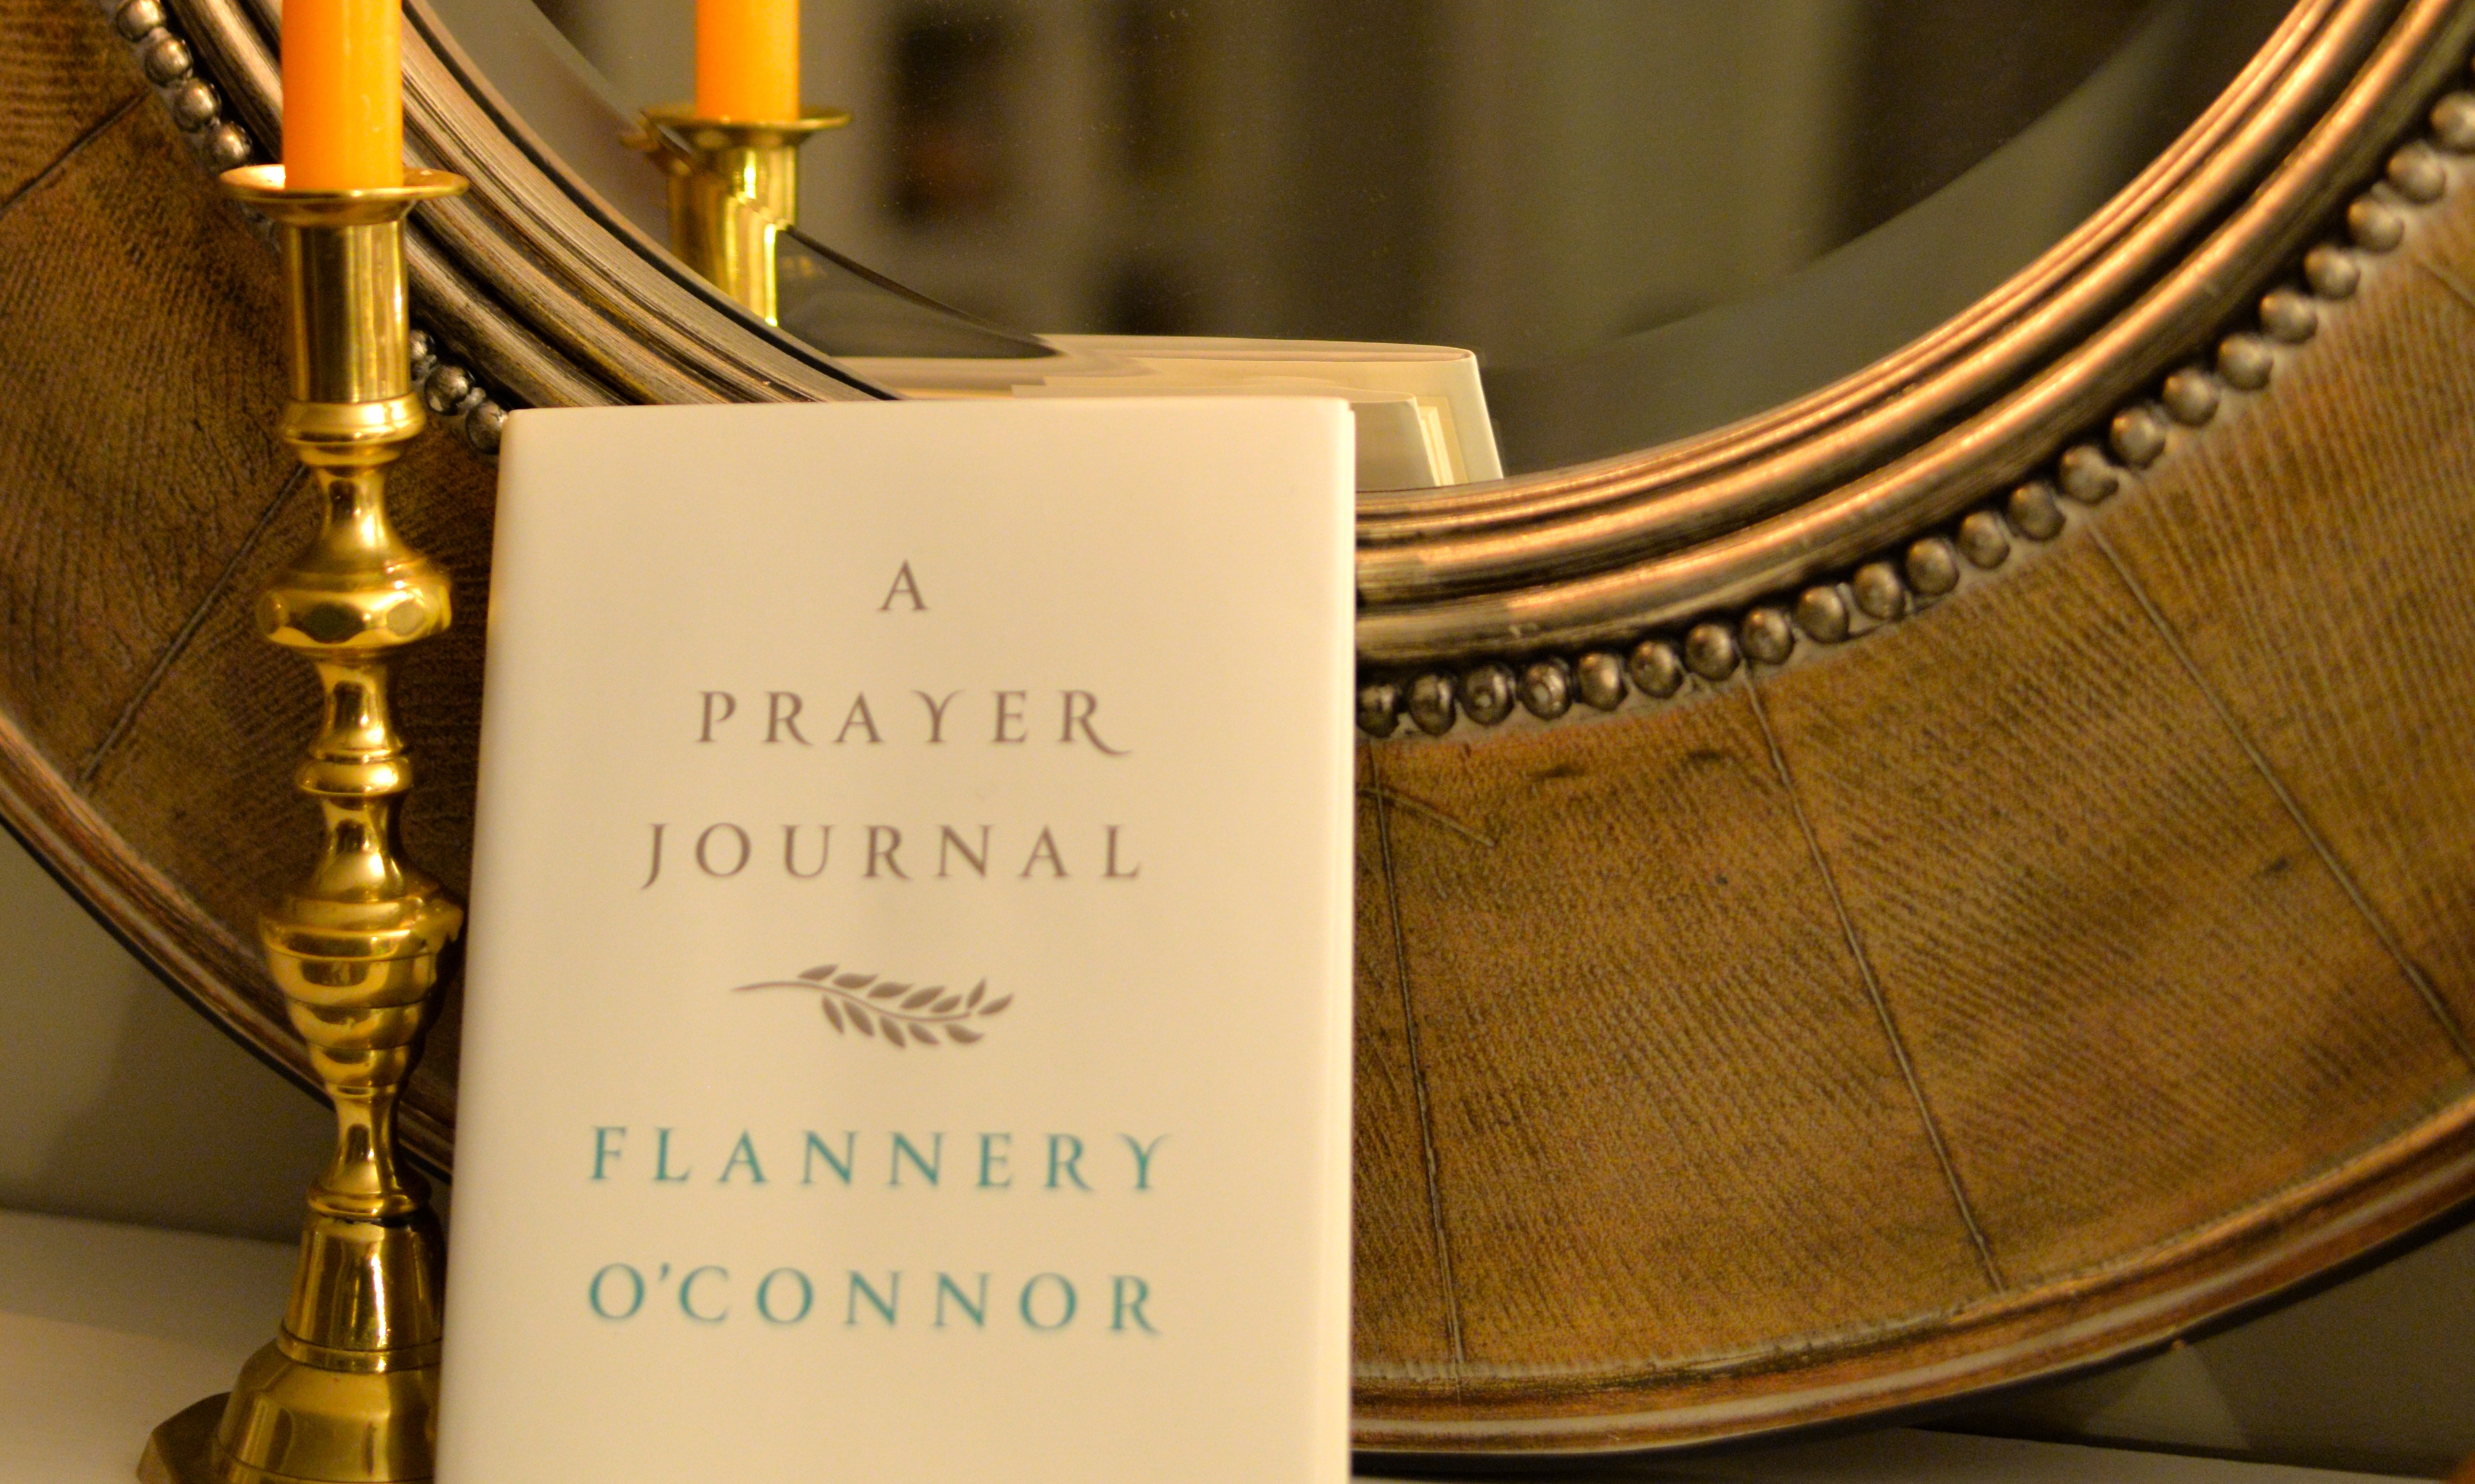 A Prayer Journal by Flannery O’Connor